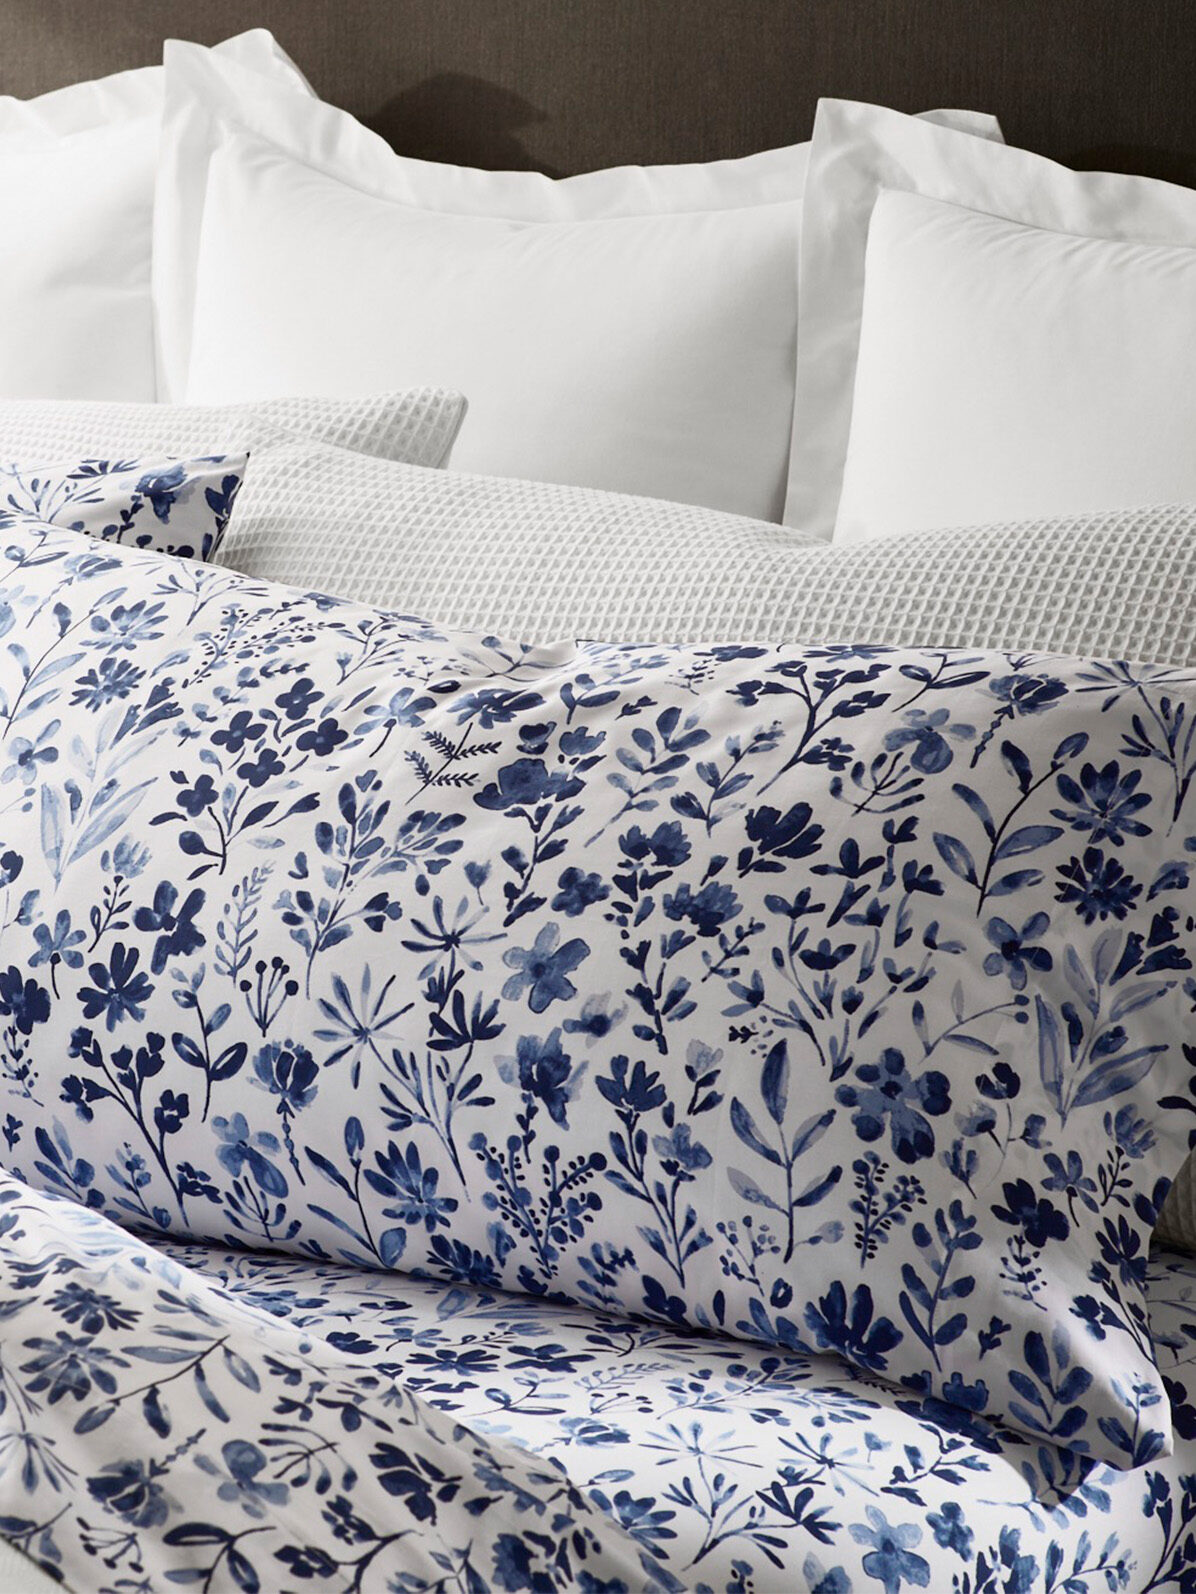 Blue and white floral Boll & Branch sheets set.